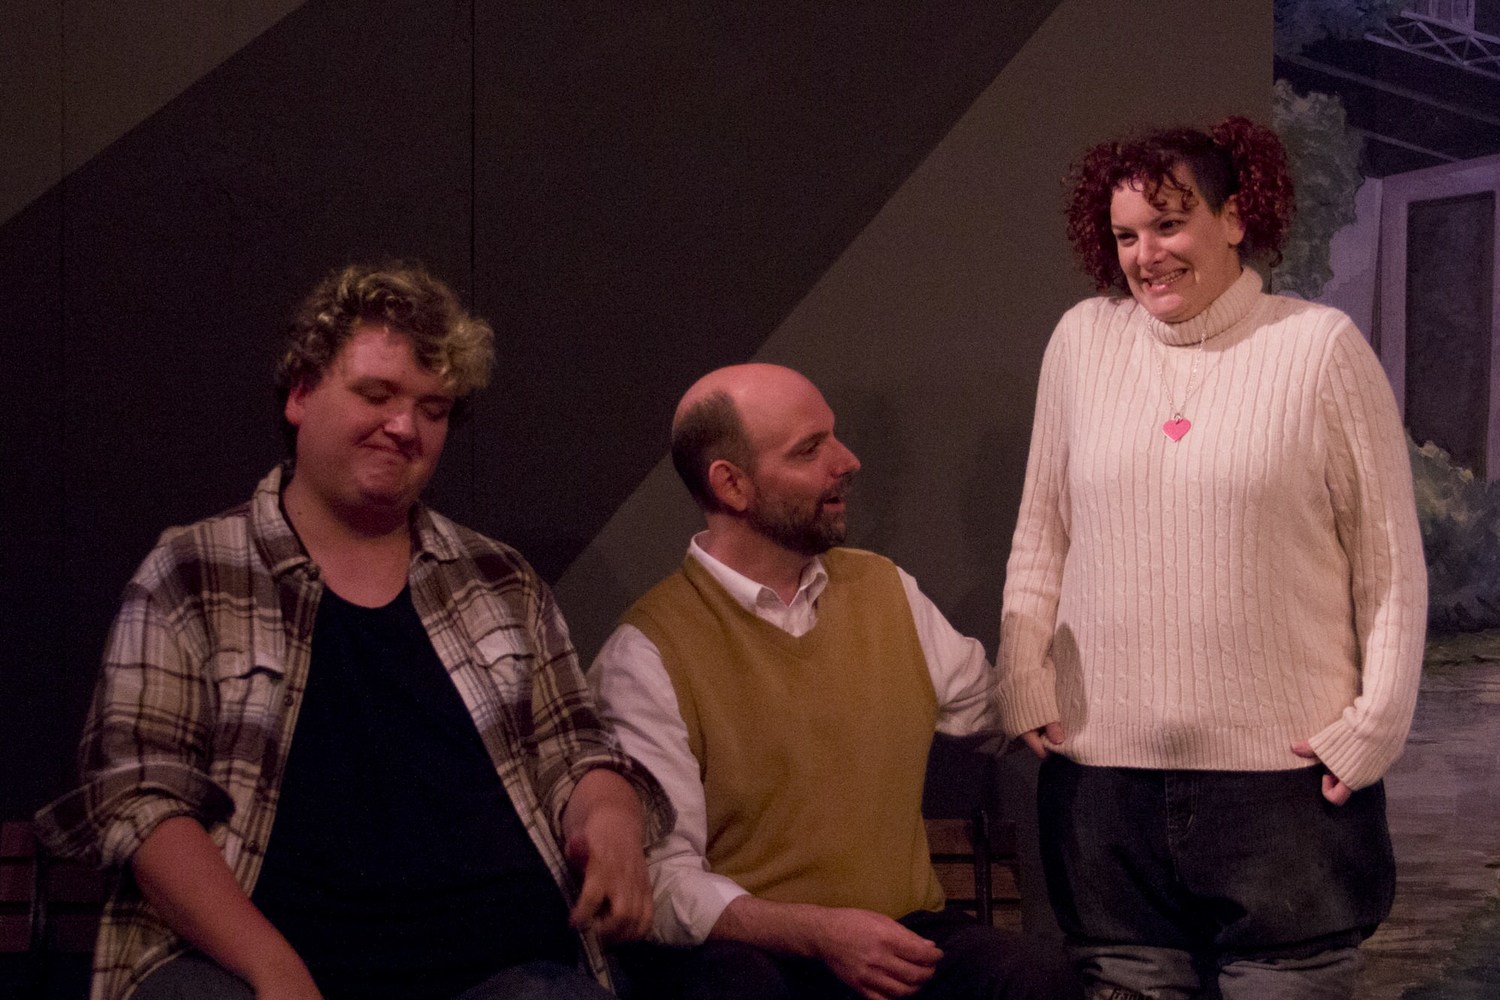 From the left: Adam Cormier as Tom, Steven Siemiatkoski as Greg and Jill Luberto as Sylvia.